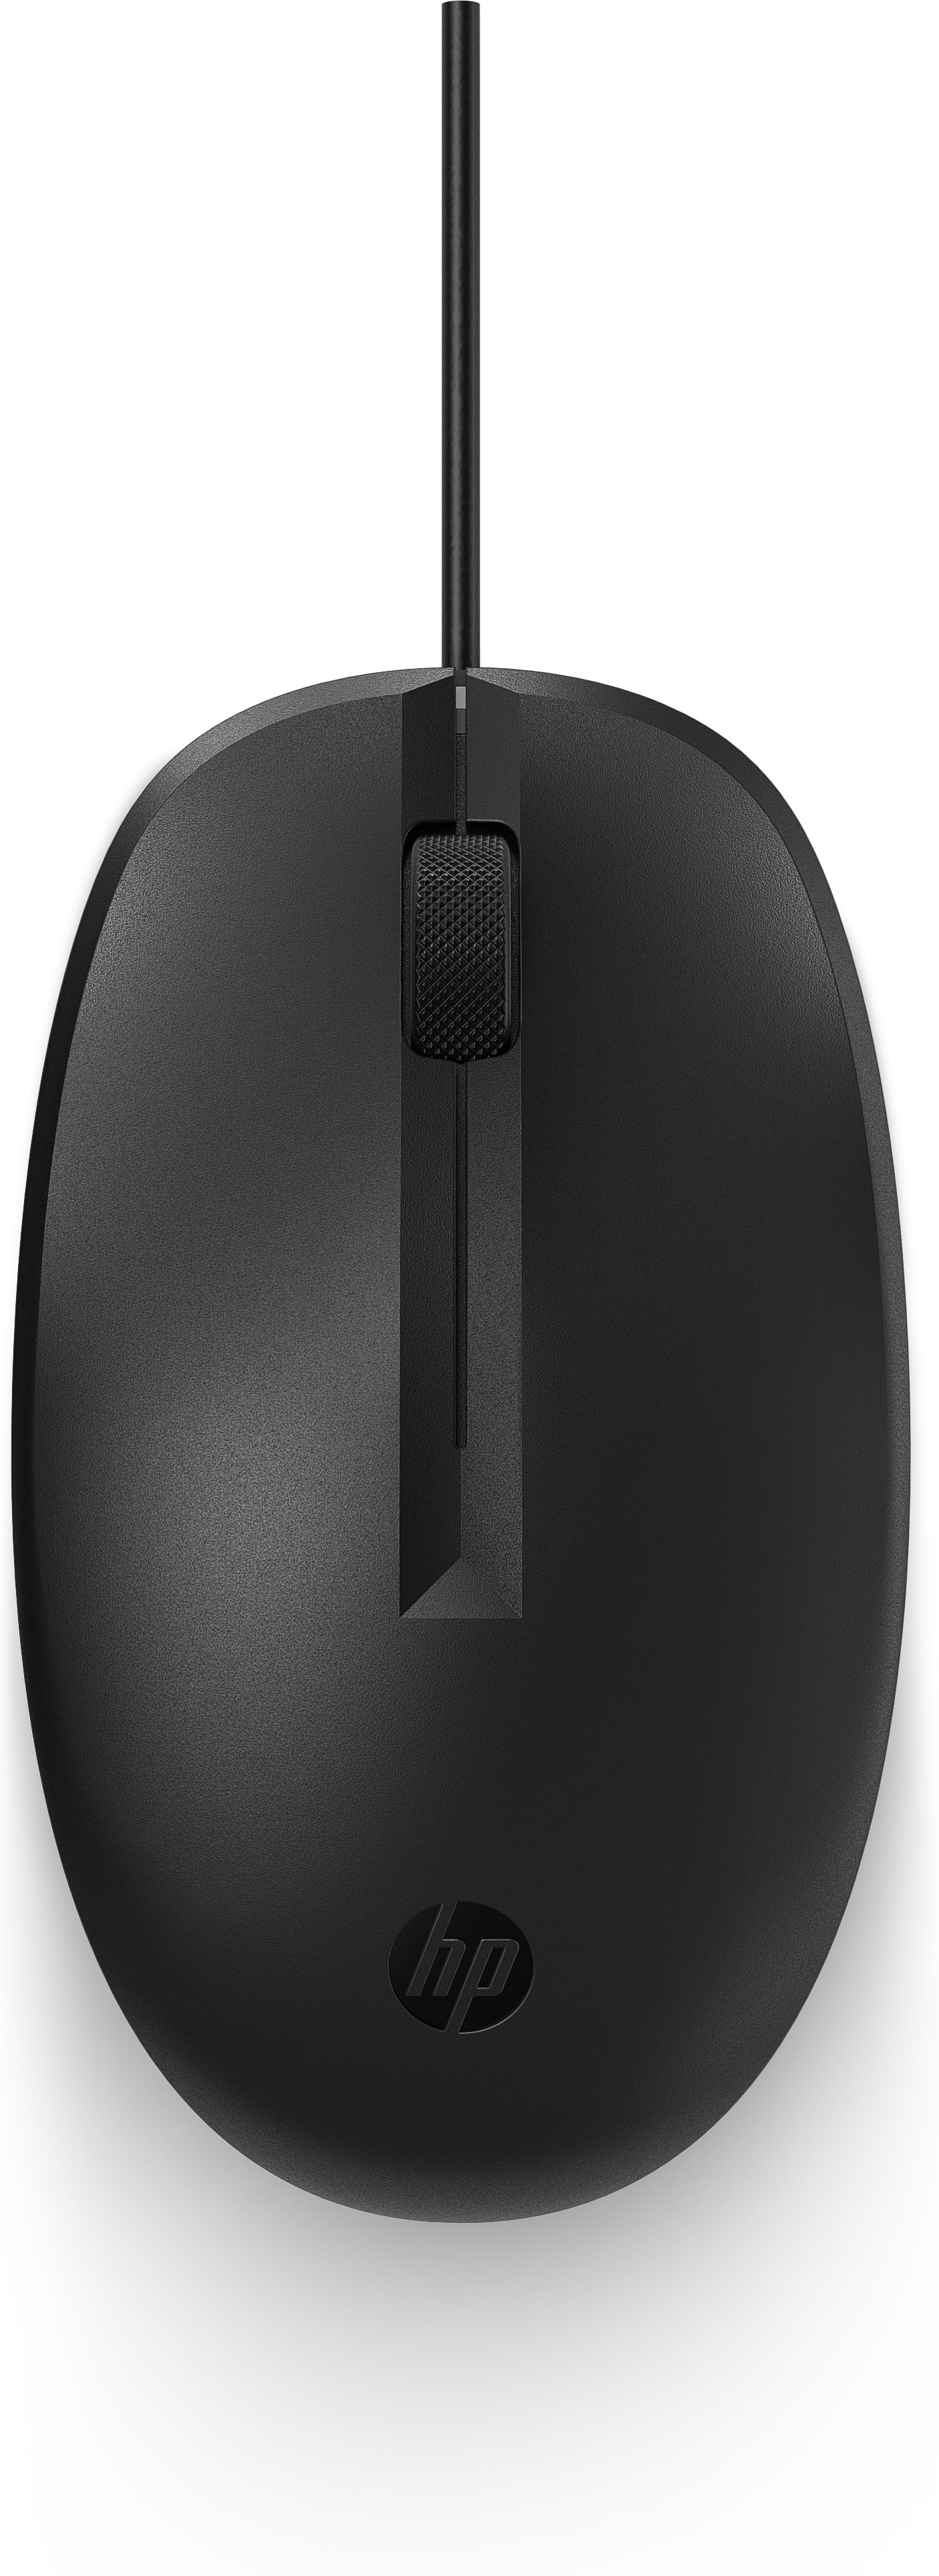 HP Mouse 265A9AA Black